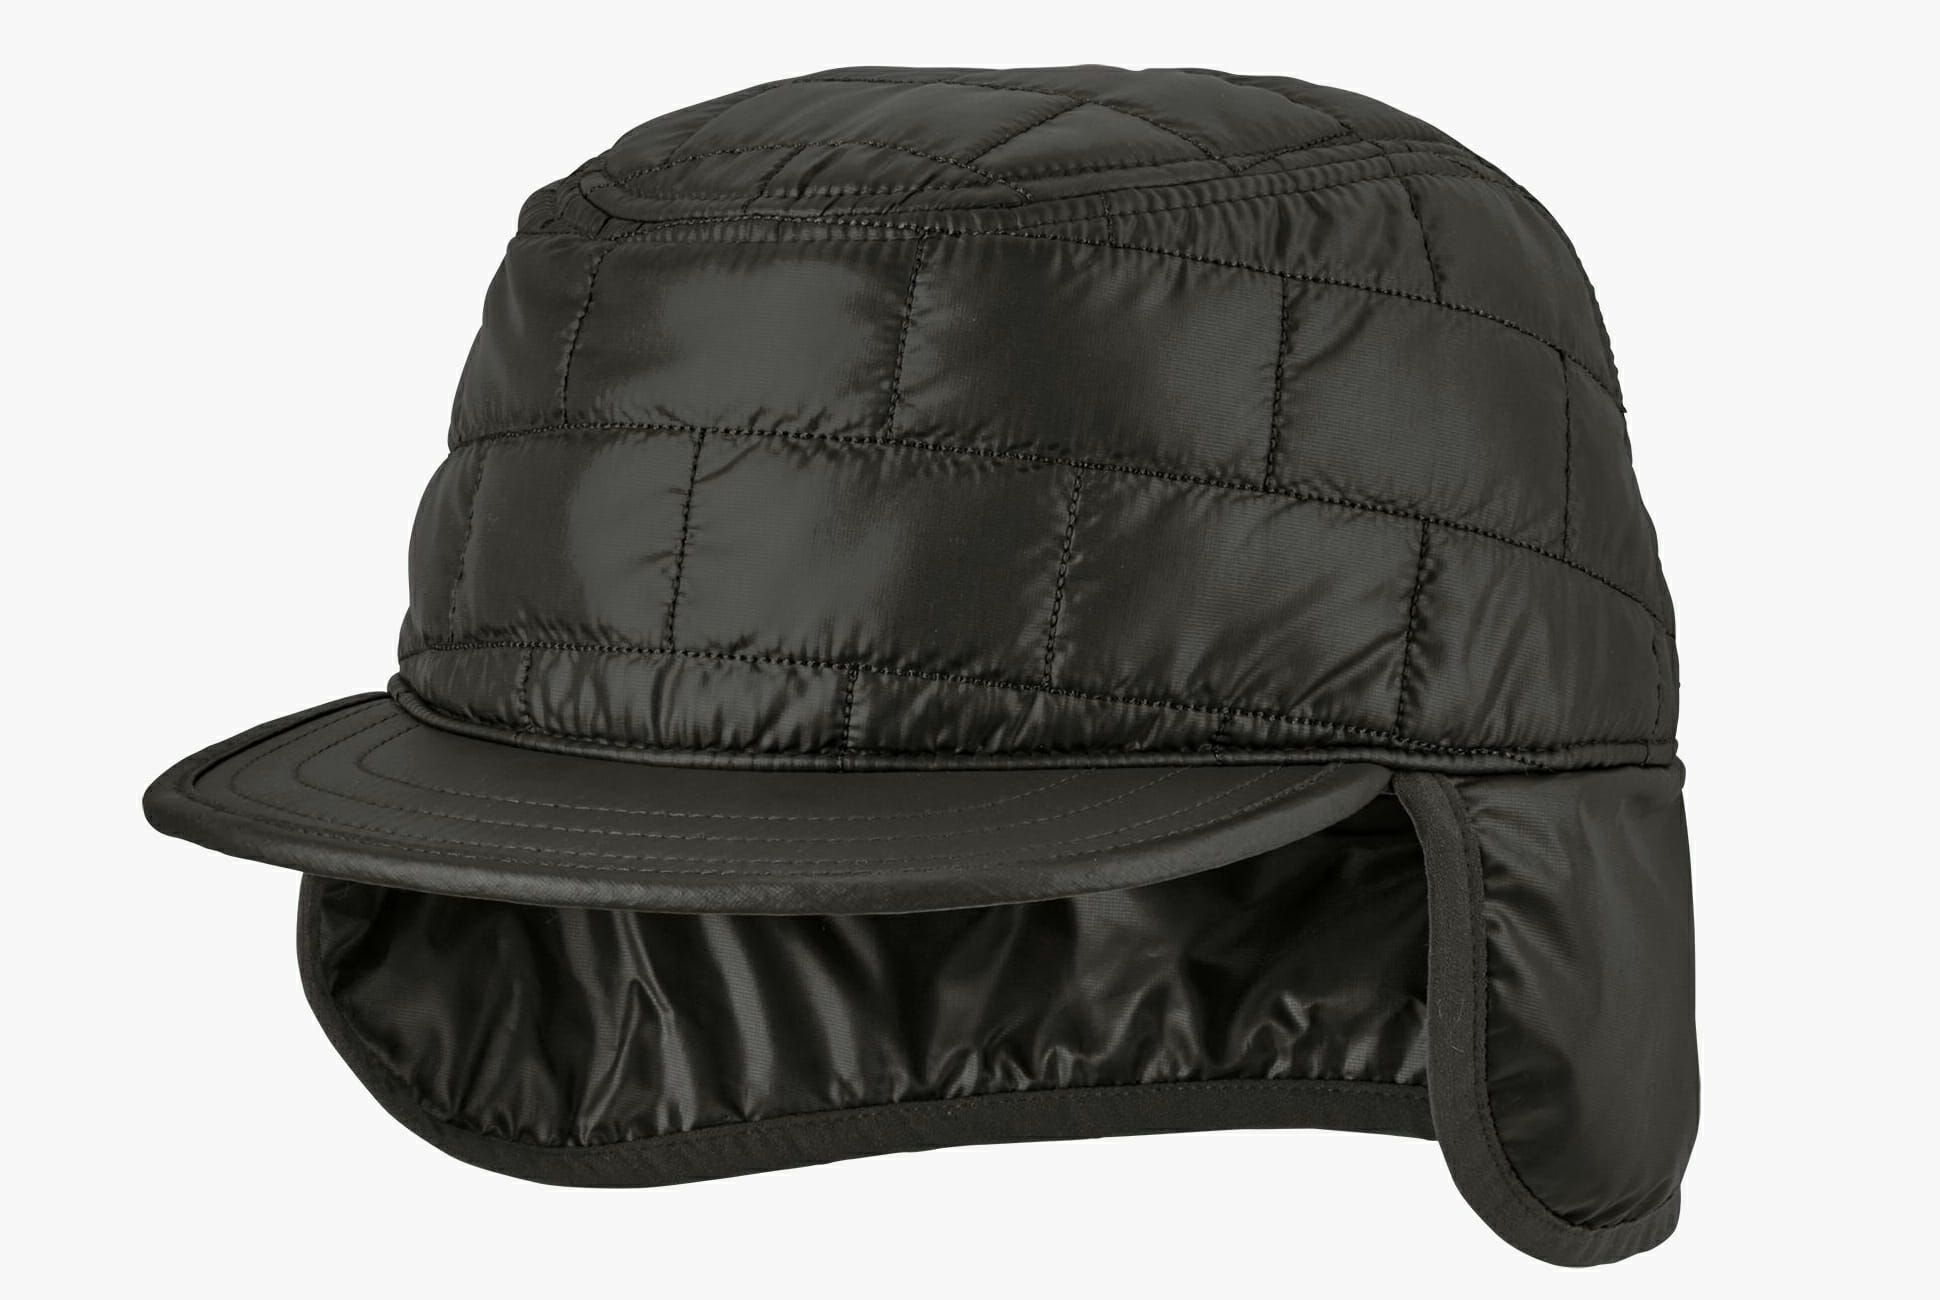 Patagonia Turned One of Its Best Jackets into a Hat